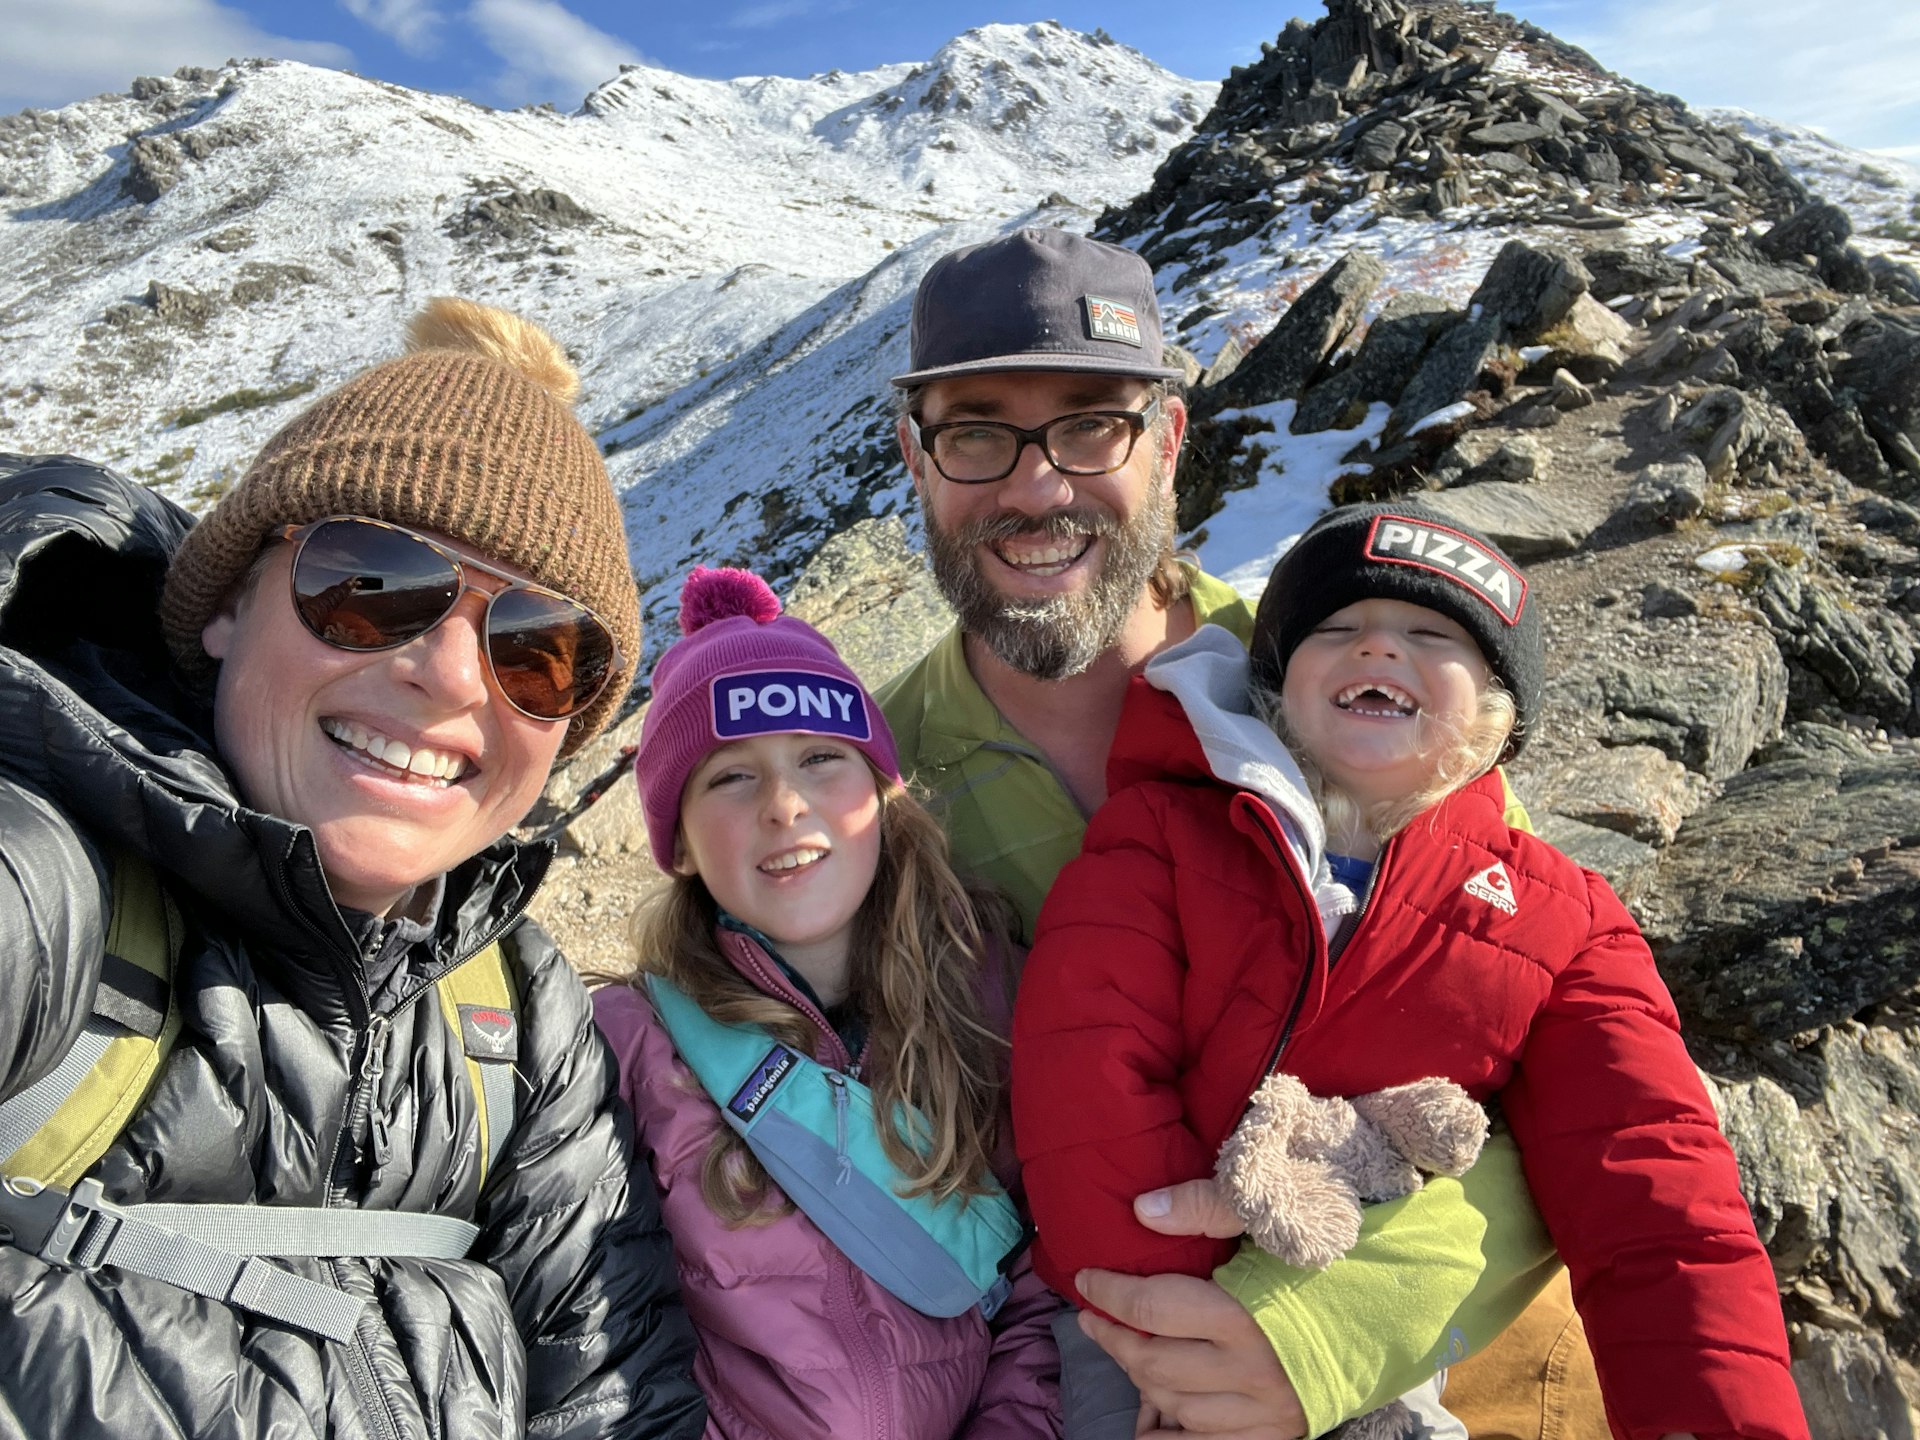 A smiling family (two adults, two kids) at the top of the Savage Alpine Trail in Denali with the snow-capped mountains in the bacjground